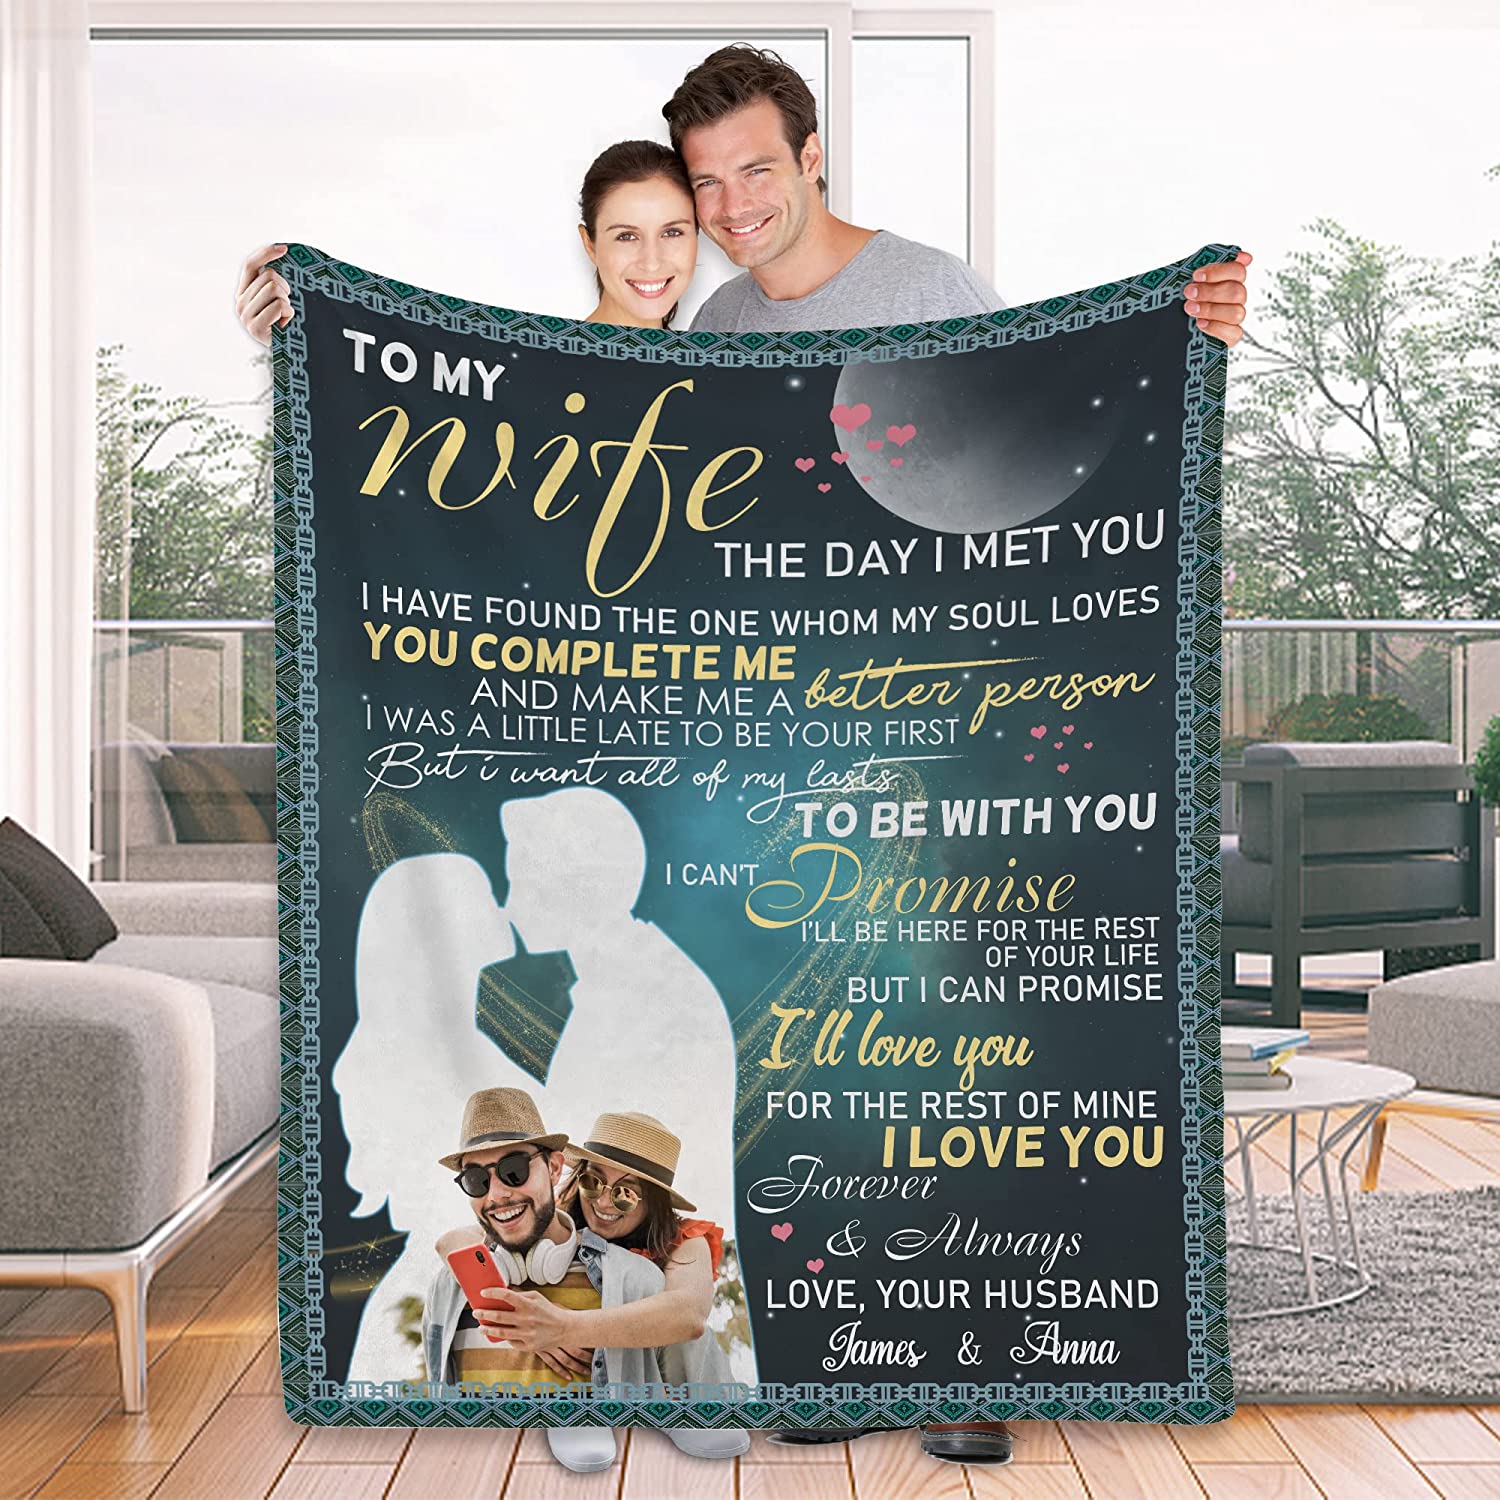 Personalized Gift For Wife Blankets - To My Wife, Couple Blanket - Custom Romantic Gift For Wife, Lover, Newlyweds, Birthday, Anniversary Wedding, Christmas, Valentine's Day Blanket - The Day I Met You Blanket